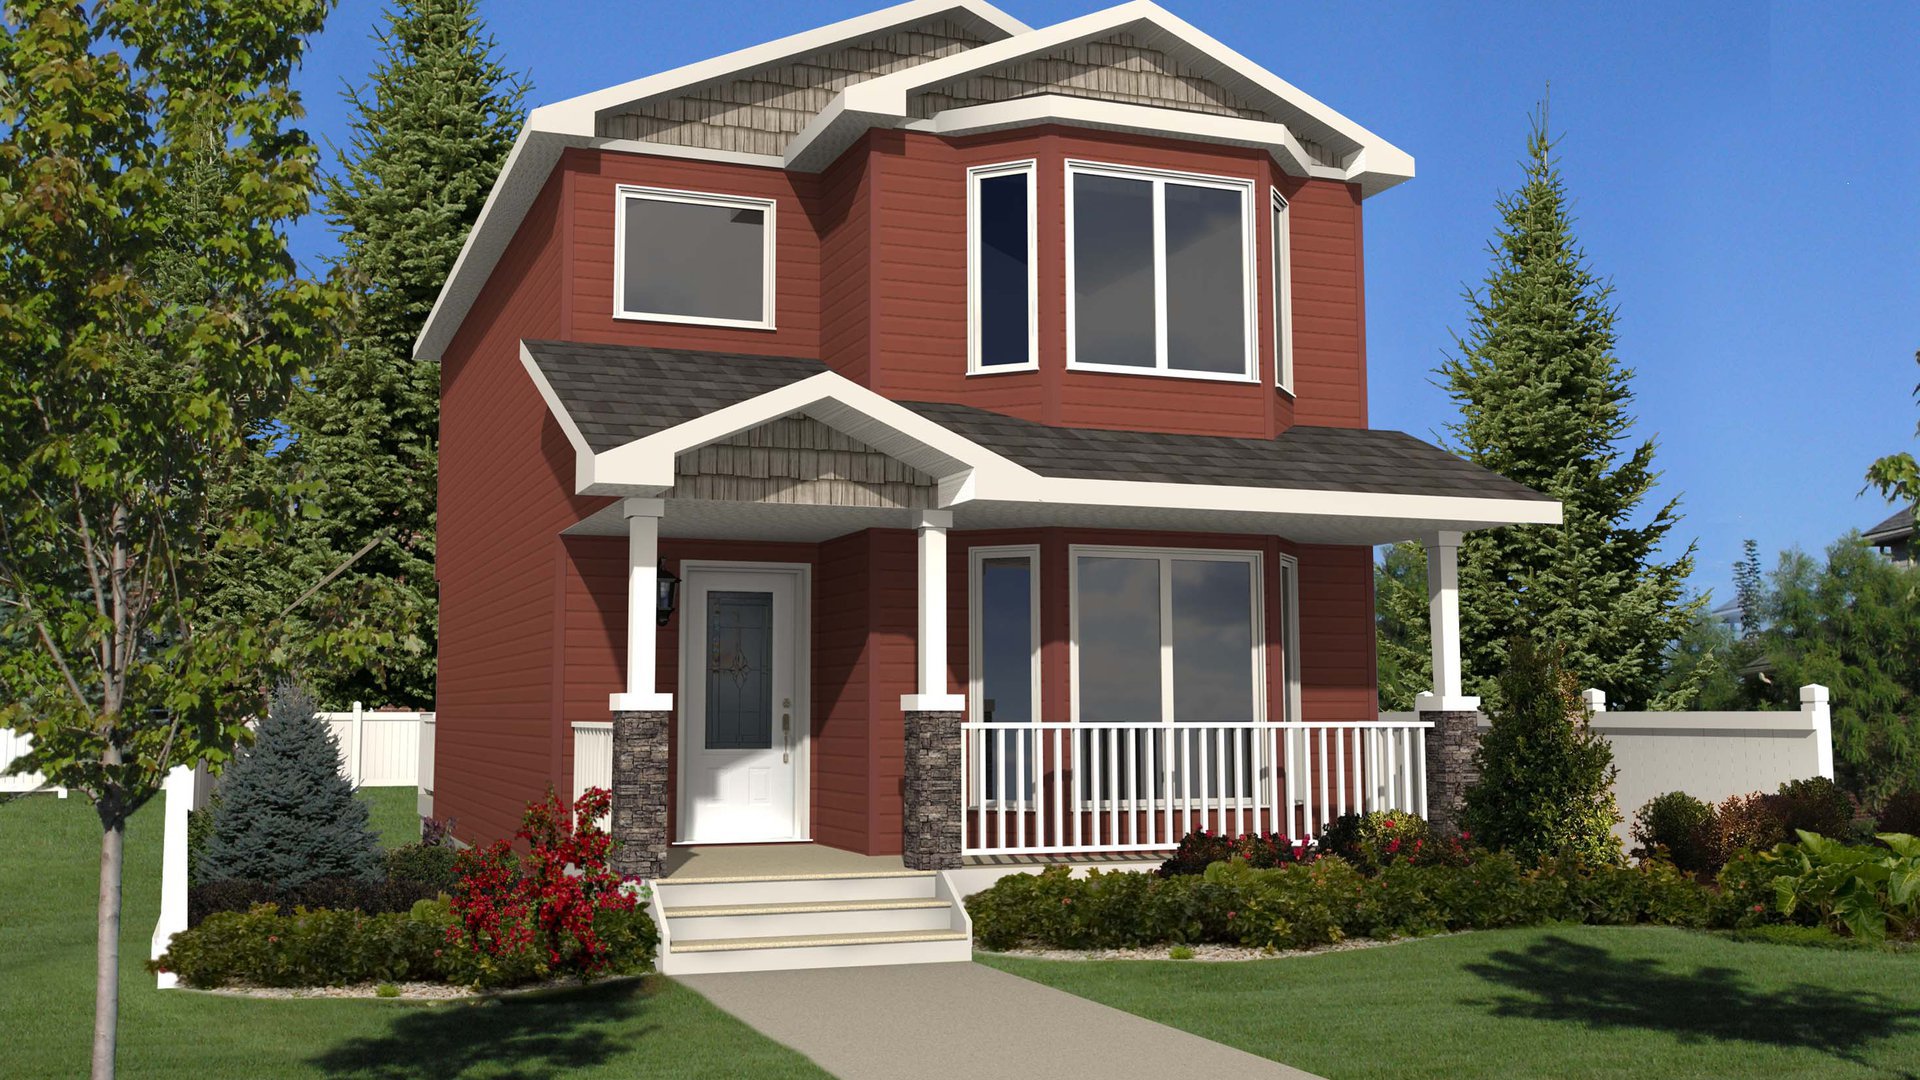 Courtney house plan modular homes nelson homes ready to move homes prefabricated home packages.jpg